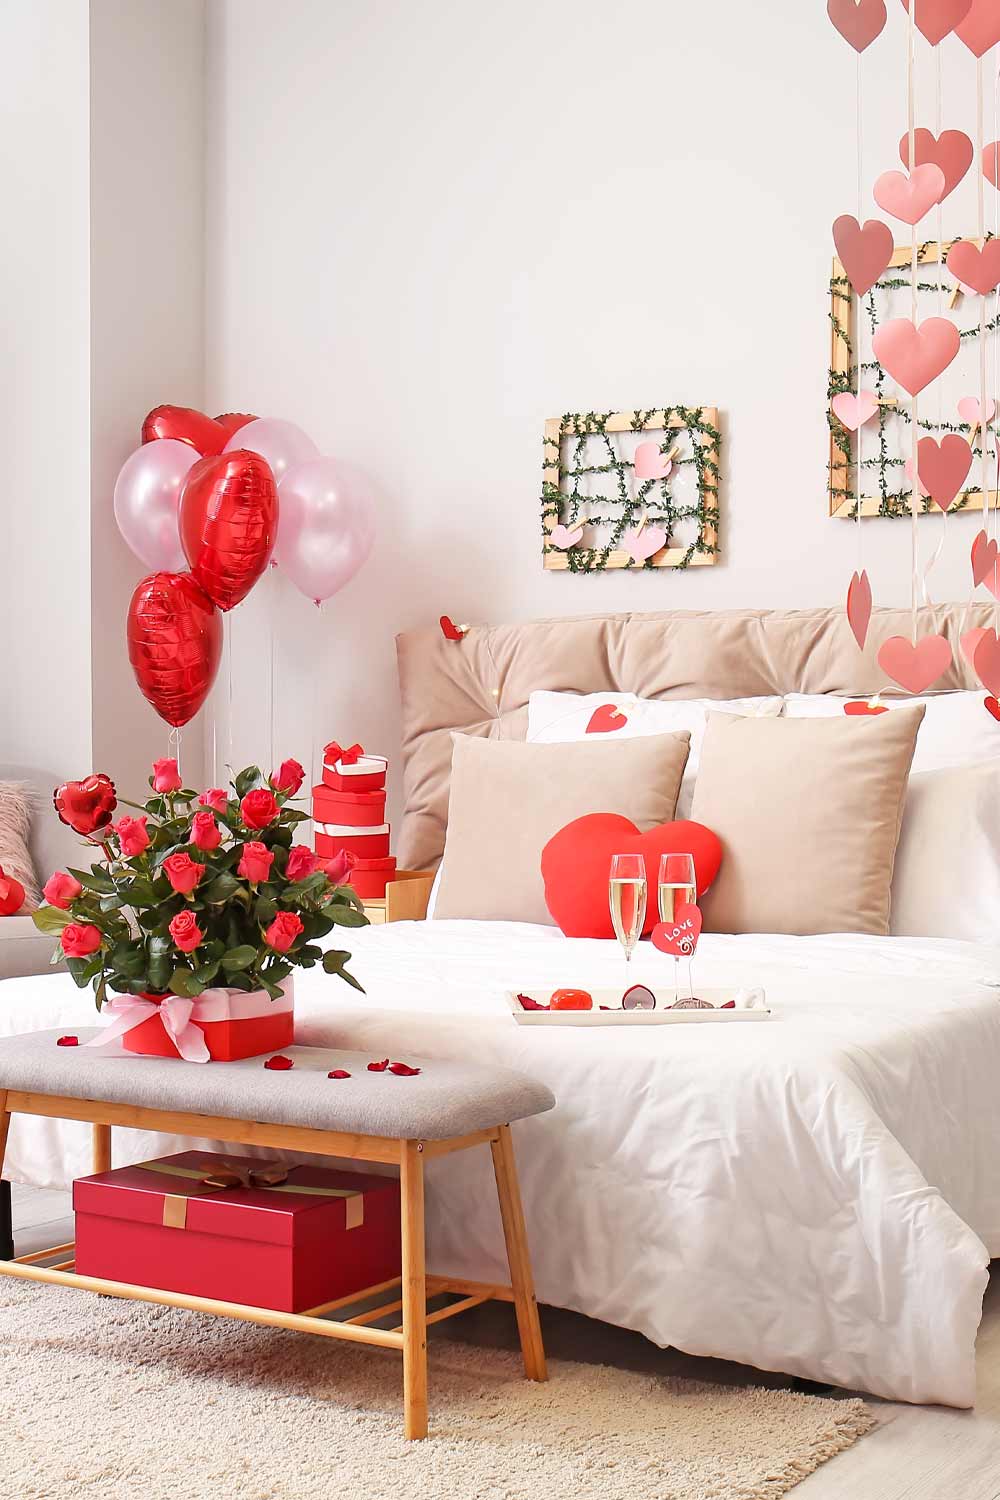 Romantic Decoration Idea of Bedroom for Valentines Day